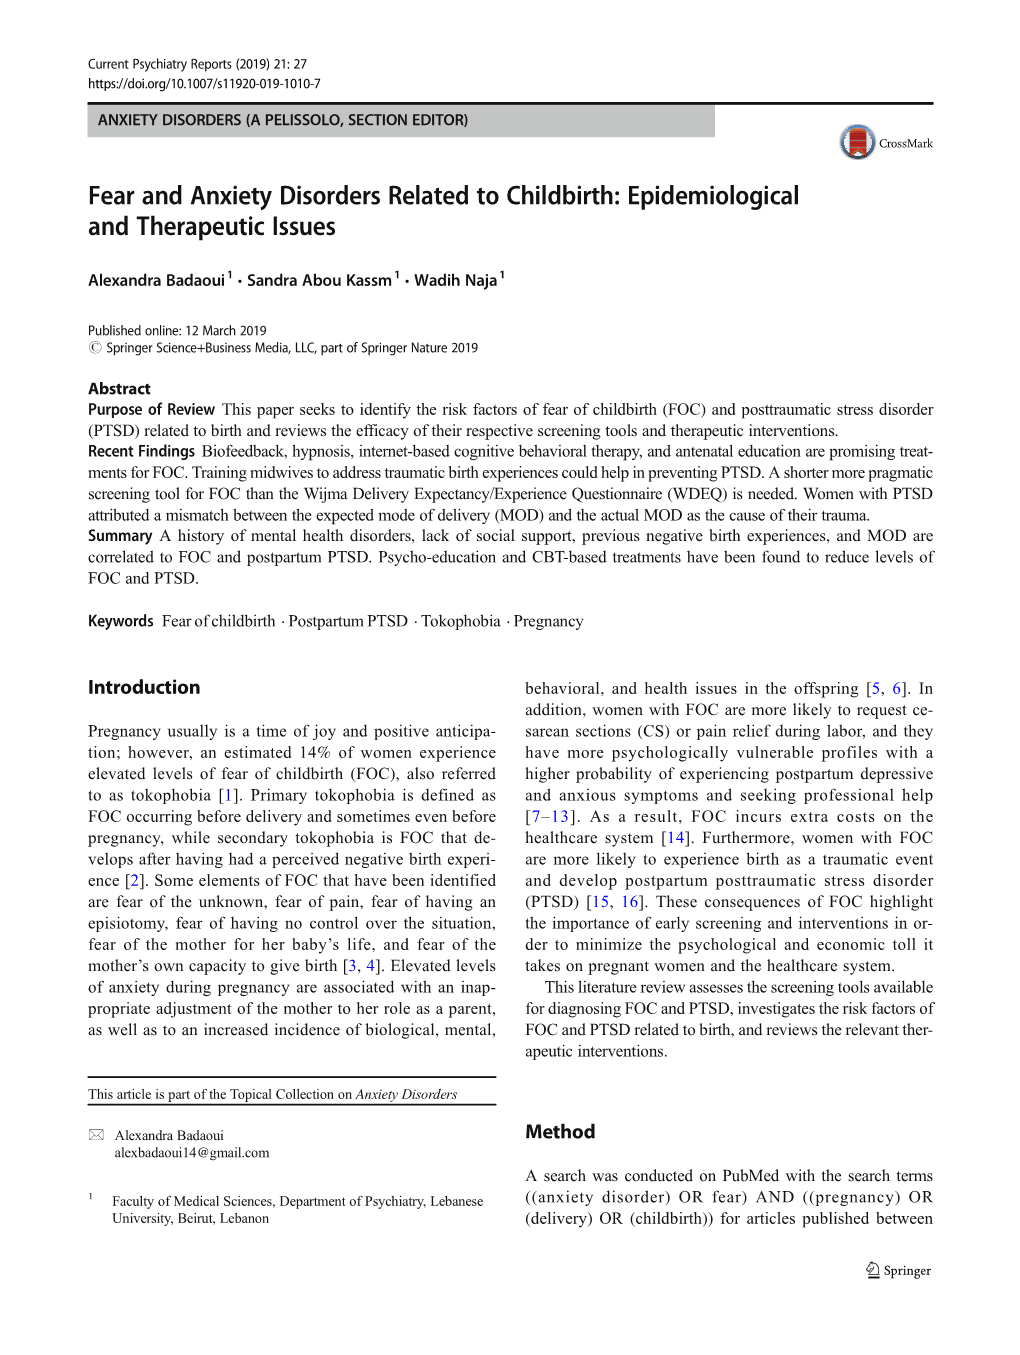 Fear and Anxiety Disorders Related to Childbirth: Epidemiological and Therapeutic Issues